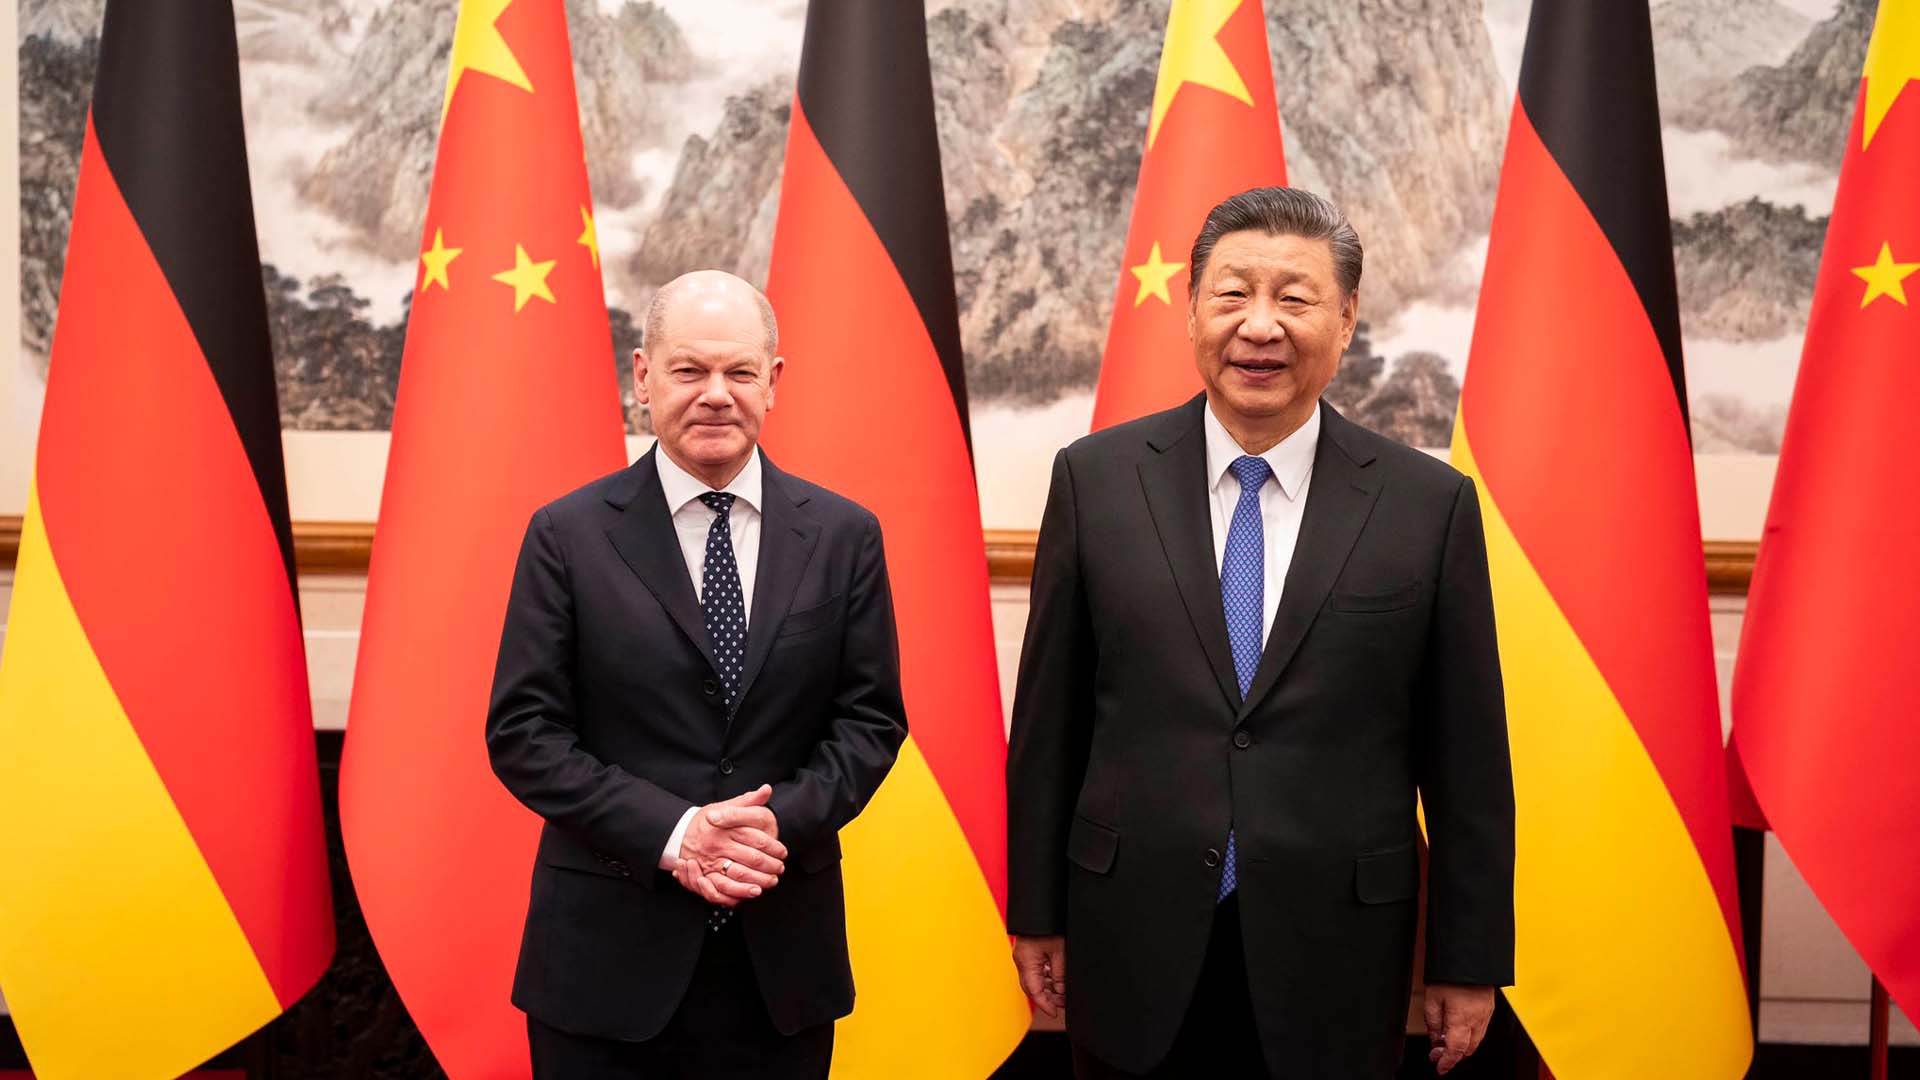 Why does Germany continue to foster economic partnerships with China? | Business and Economy